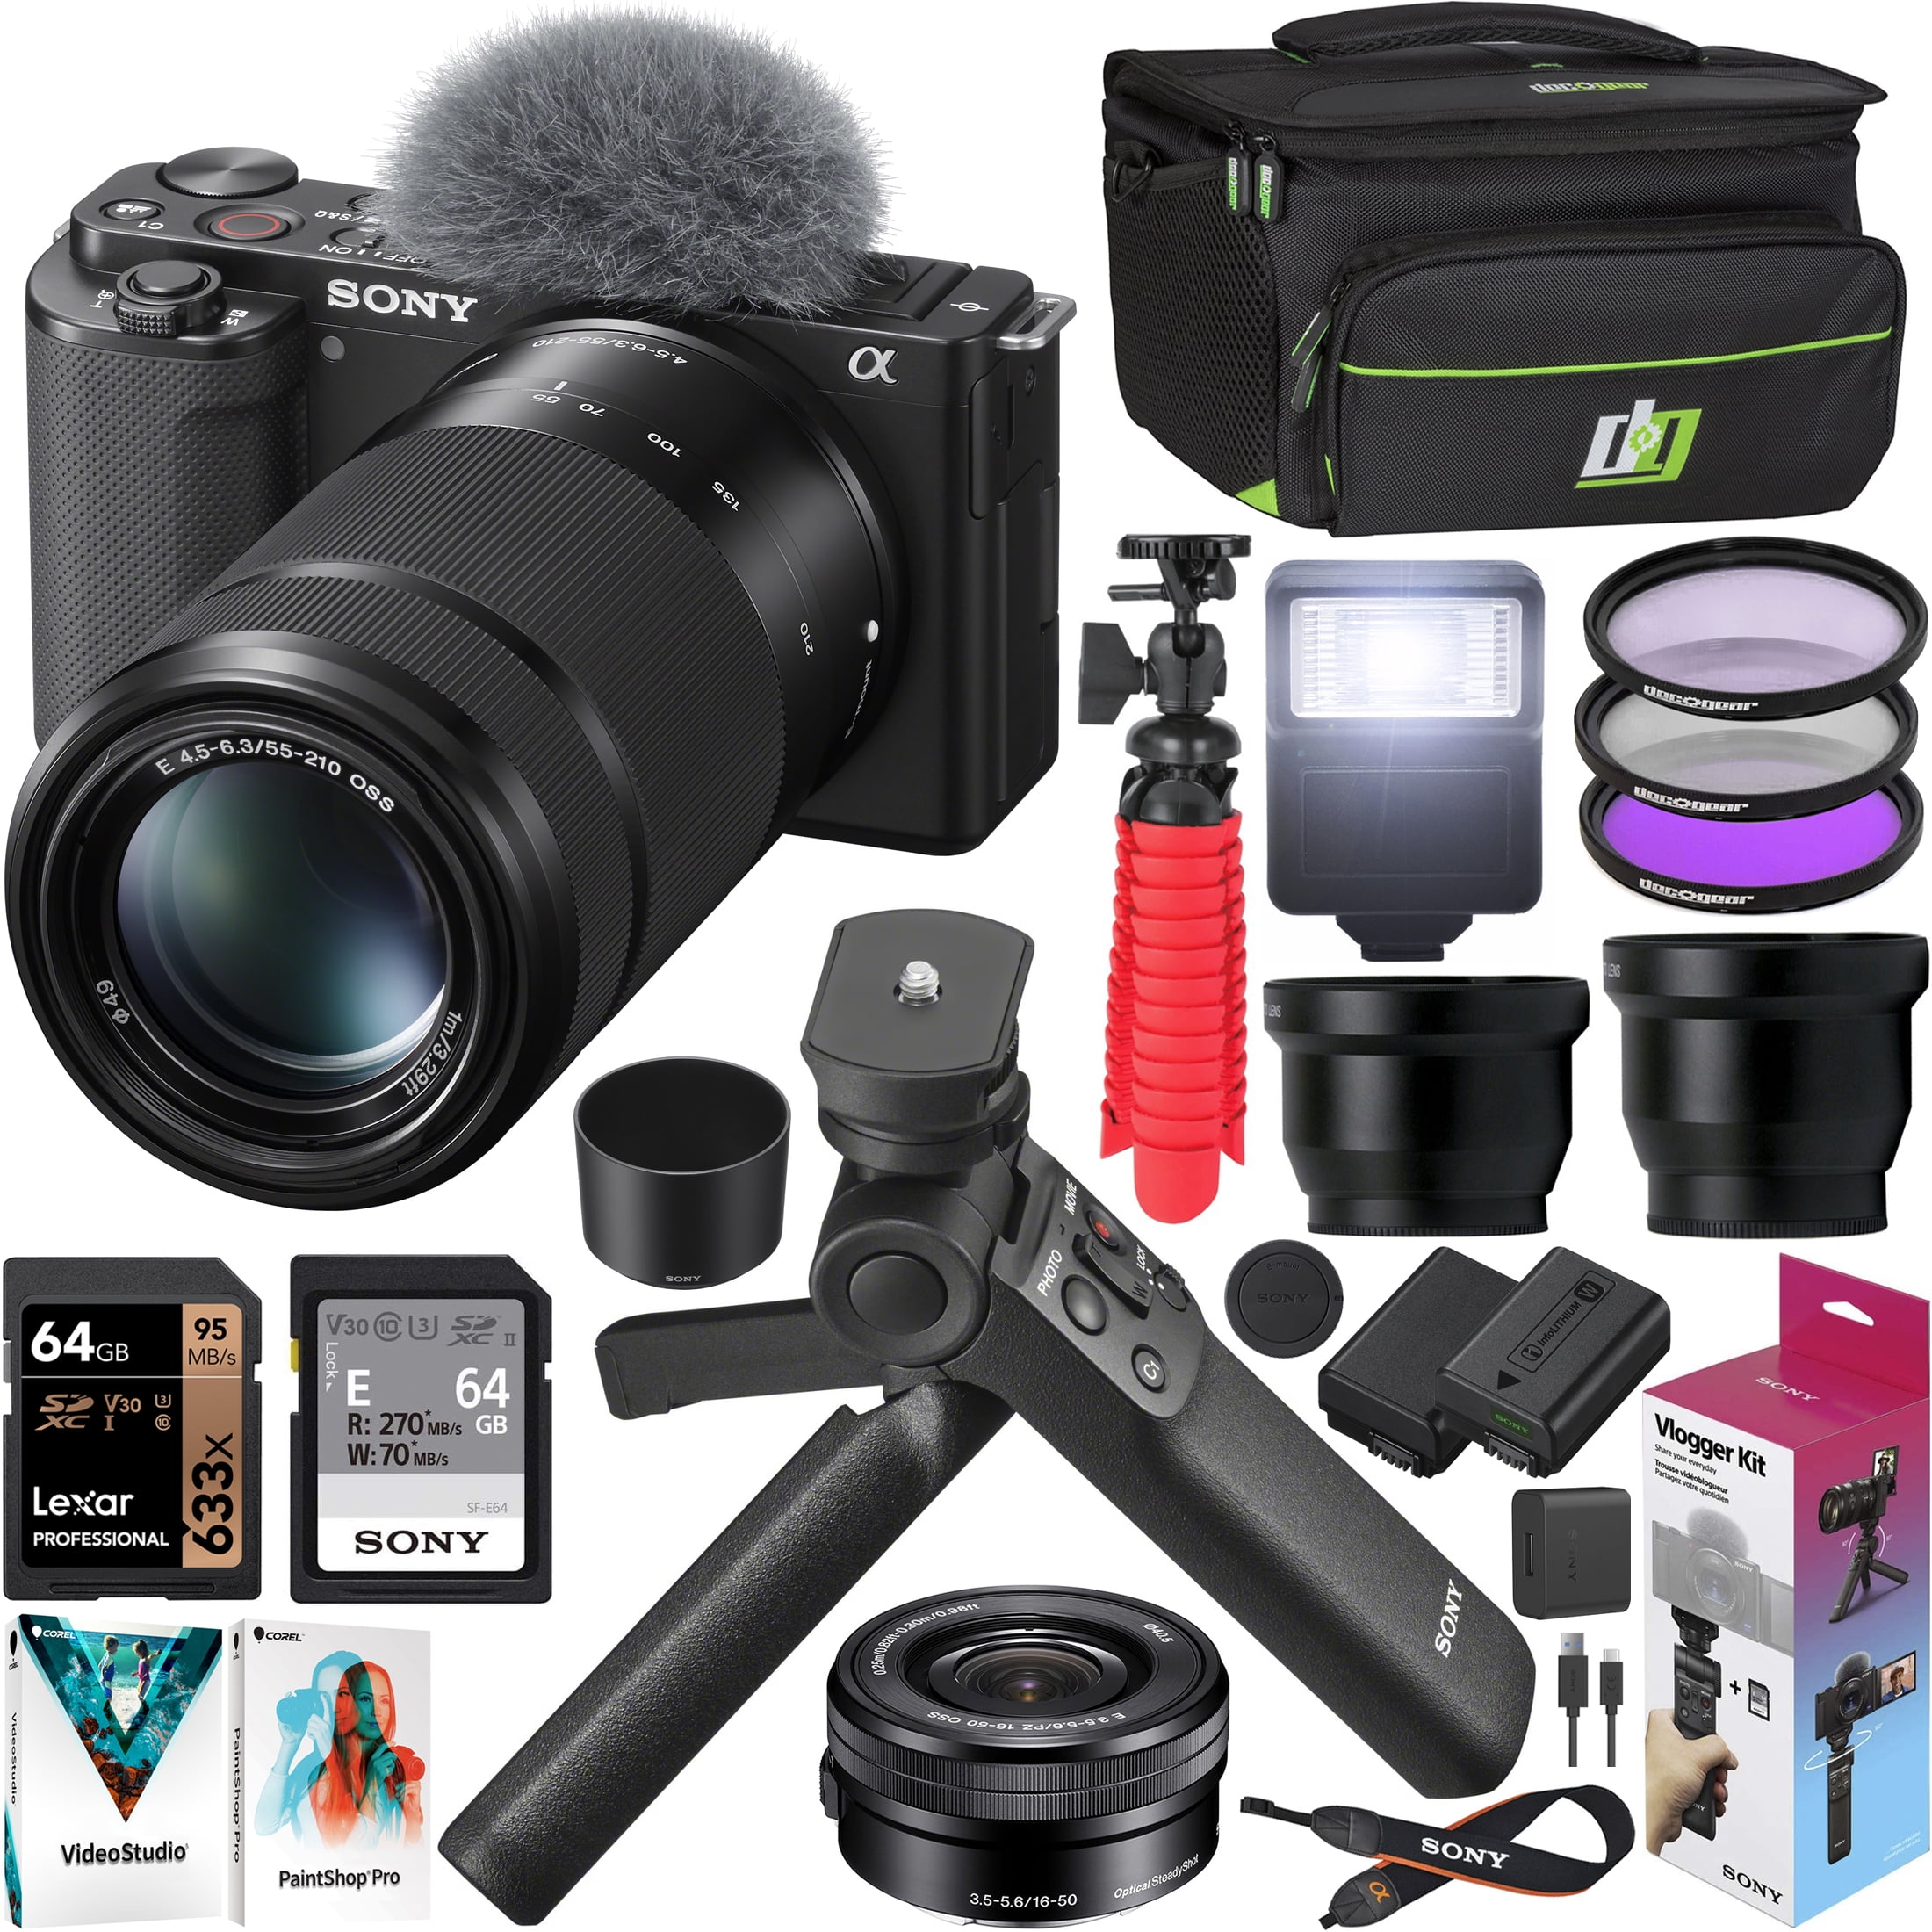 Sony ZV-E10 Mirrorless Camera 2 Lens Vlogger Kit 16-50mm + 55-210mm  Ilczv-E10L/B Black Bundle with ACCVC1 Including GP-VPT2BT Grip + Filters +  Wide 